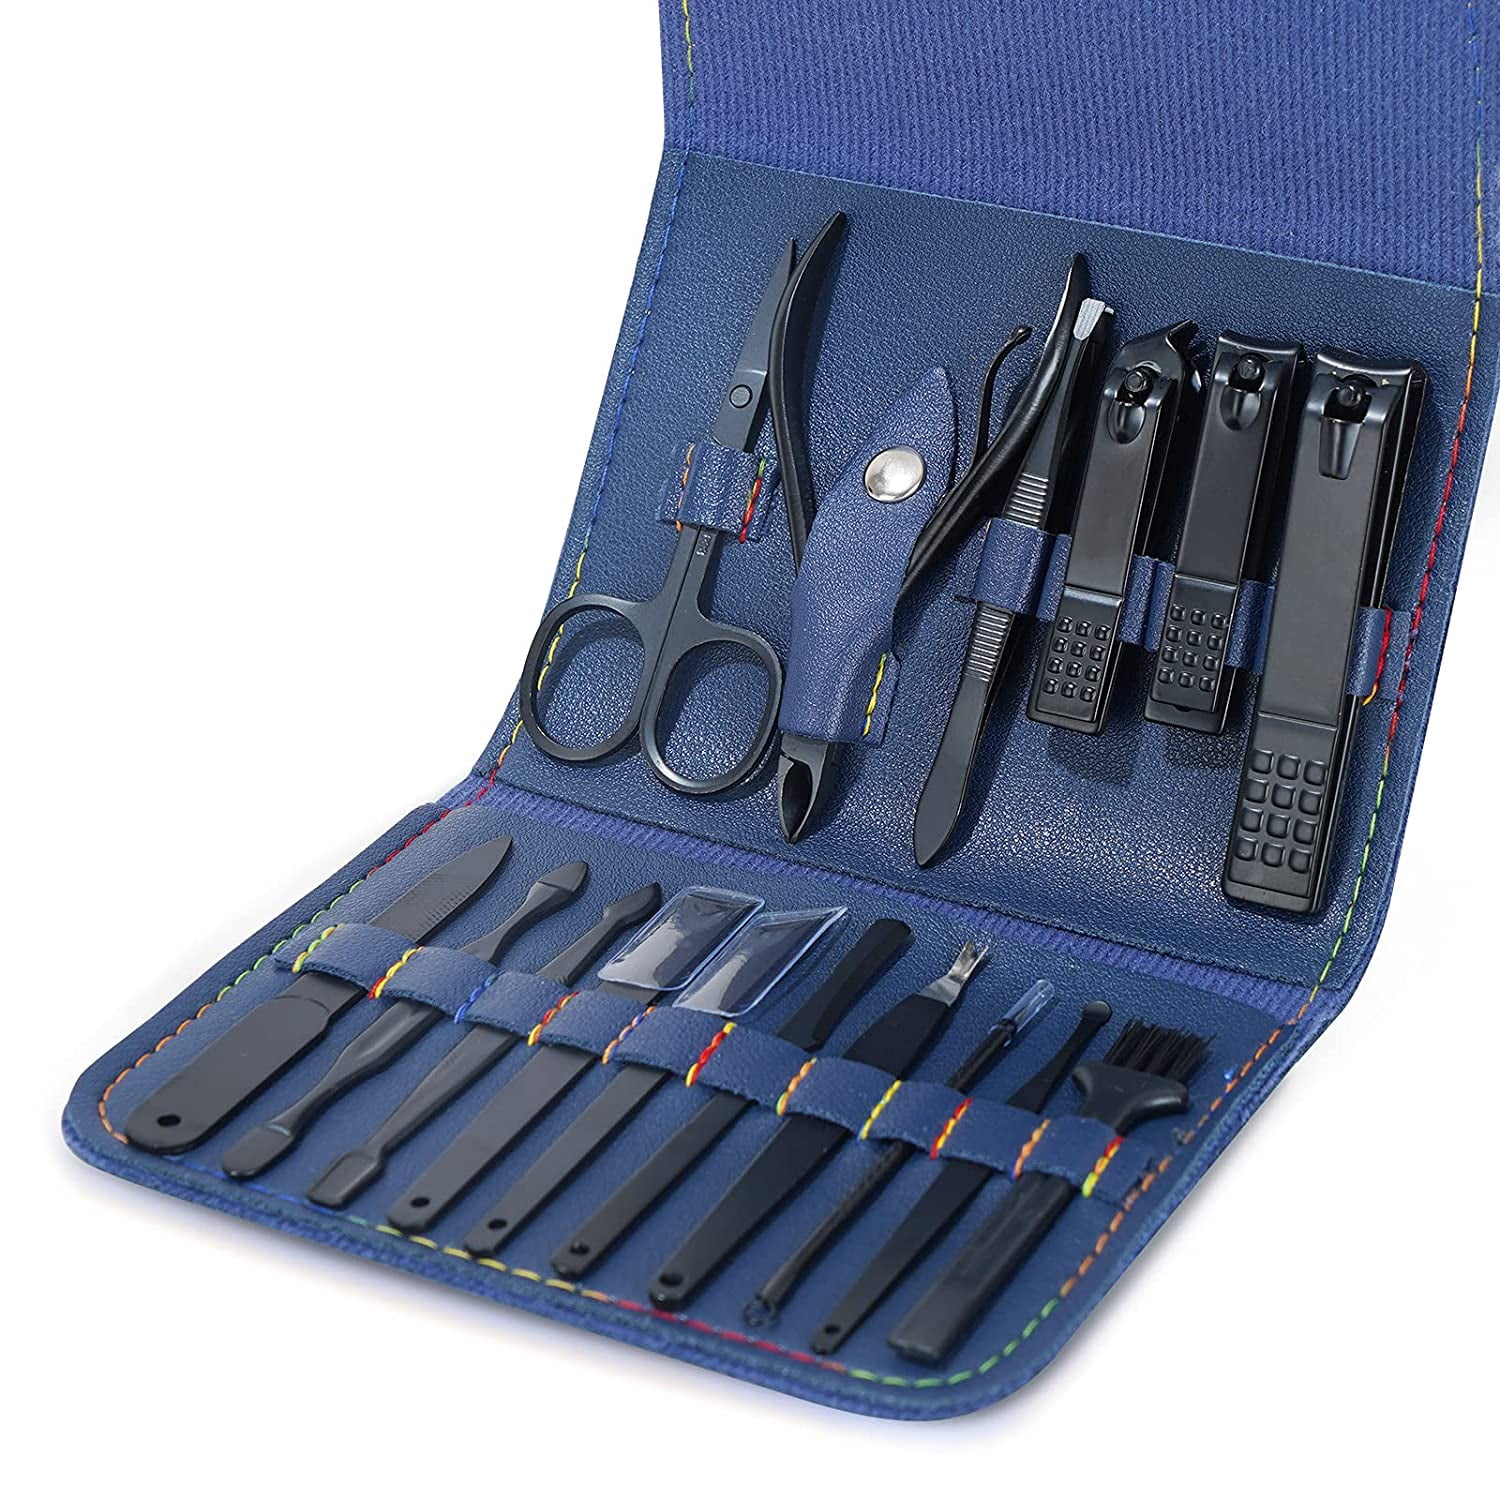 Professional Stainless Steel Manicure And Manicure Pedicure Kit Walmart  With Travel Case Kit From Tcmhealth, $7.31 | DHgate.Com